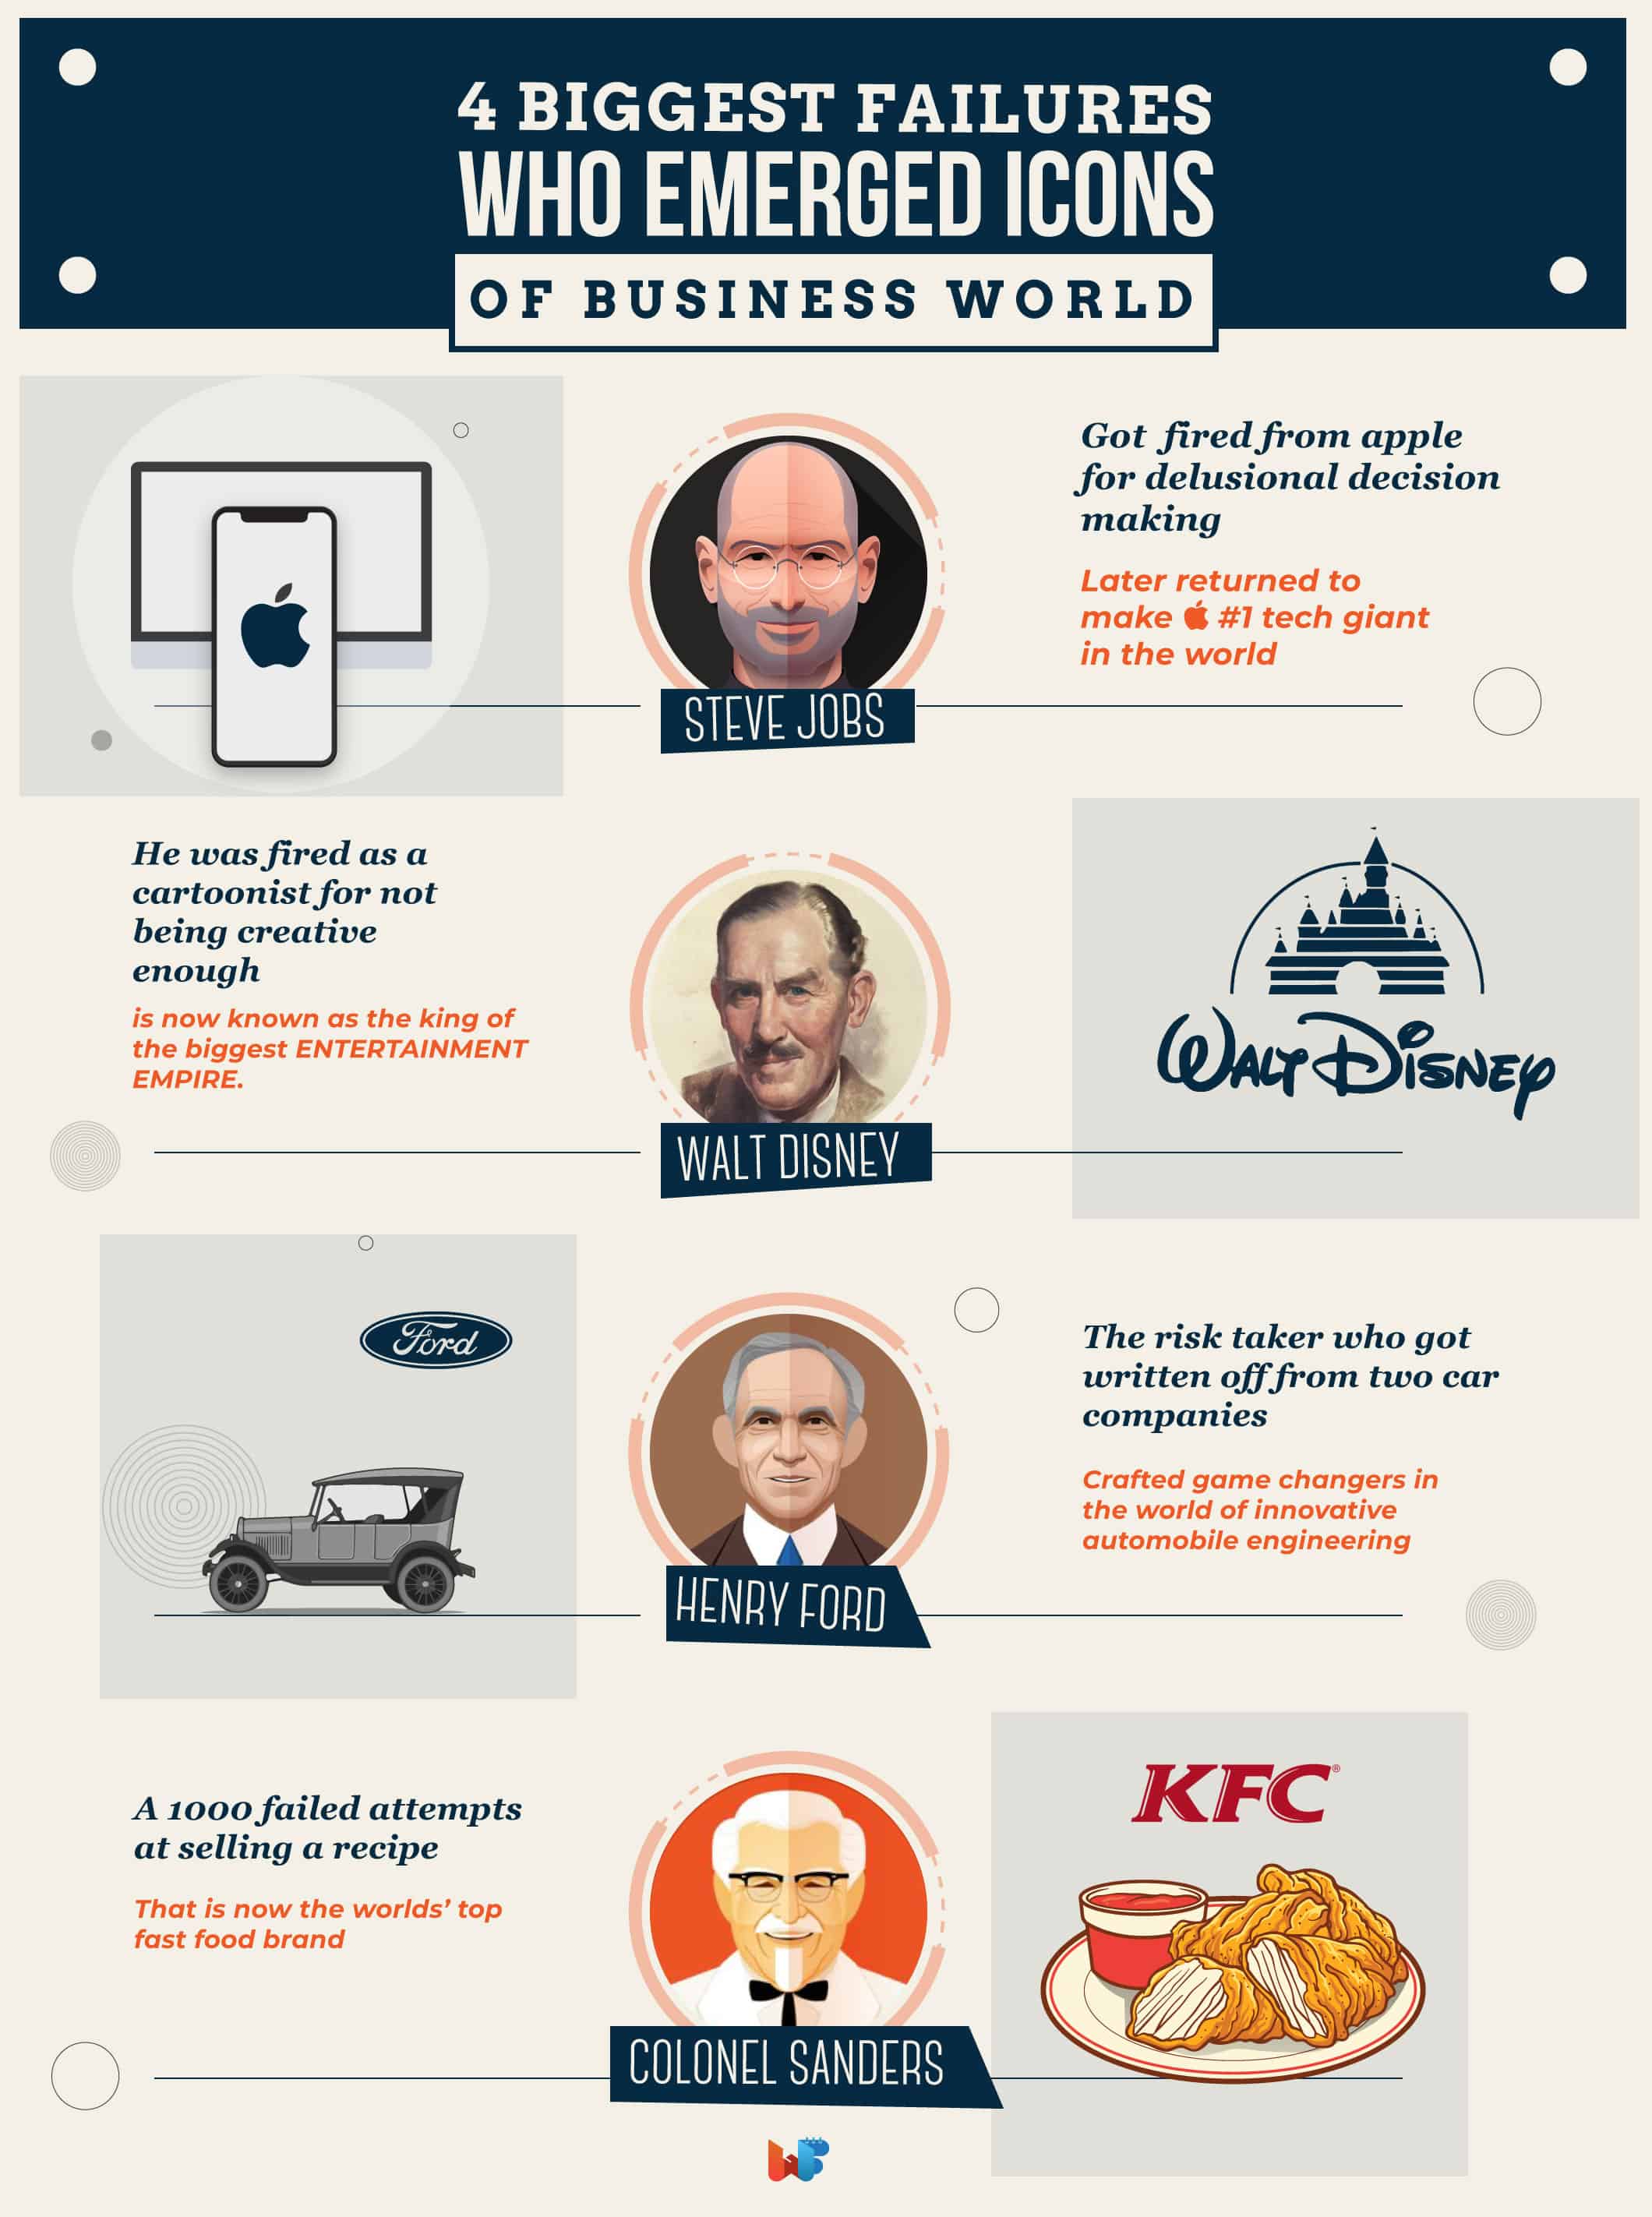 BIGGEST-FAILURES-WHO-EMERGED-ICONS-OF-BUSINESS-WORLD